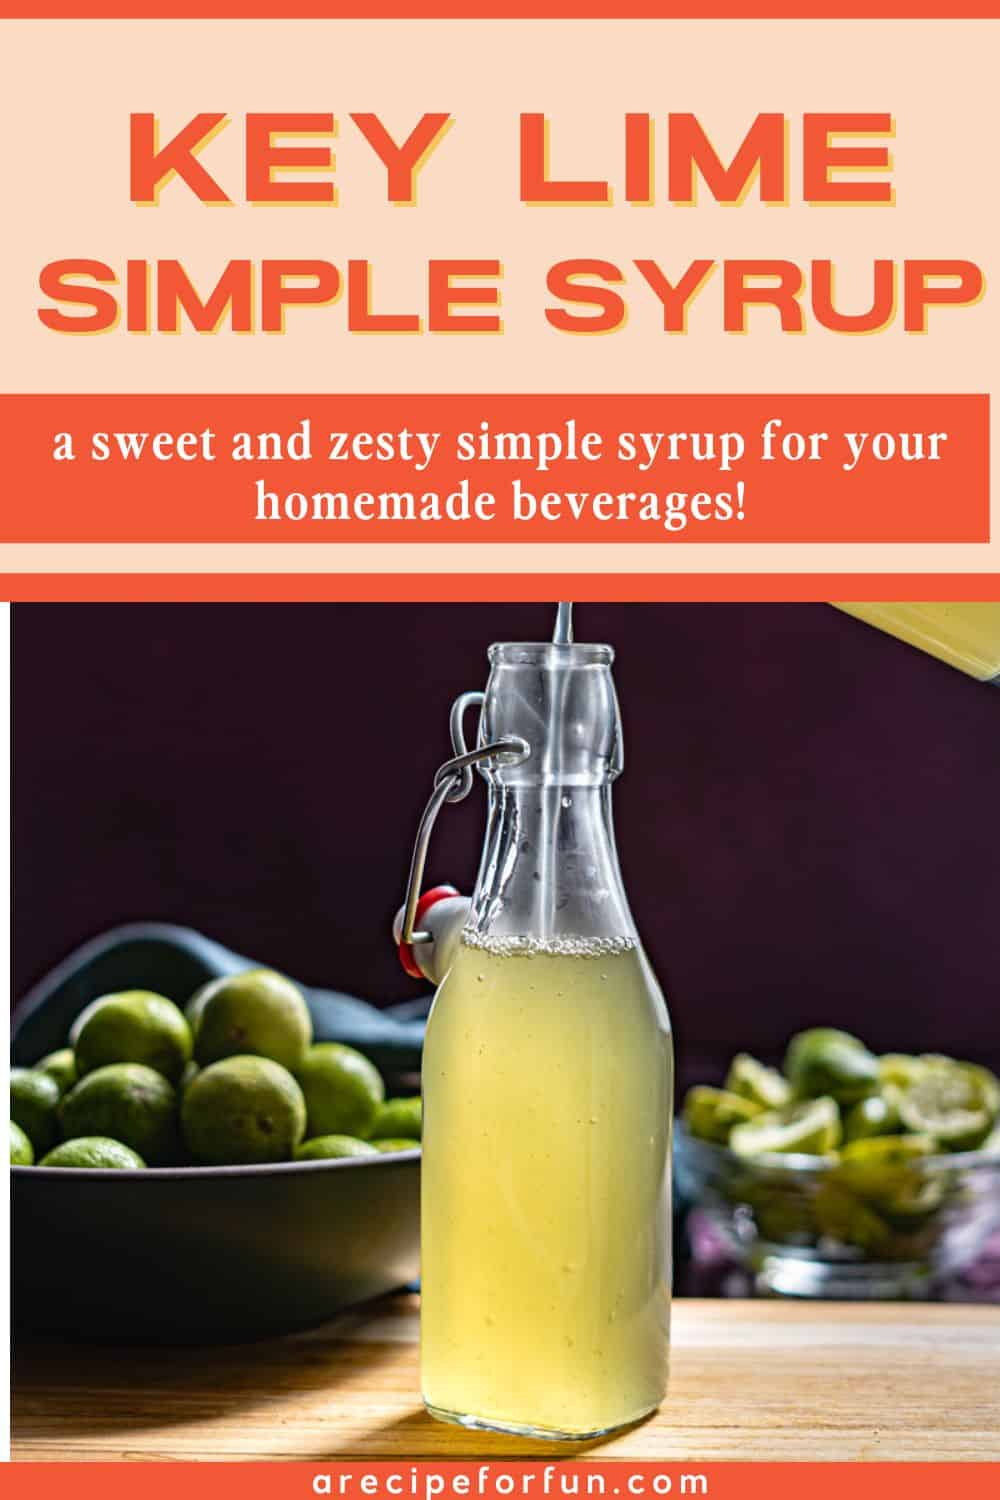 Pinterest Pin for a post about a recipe for a key lime simple syrup.